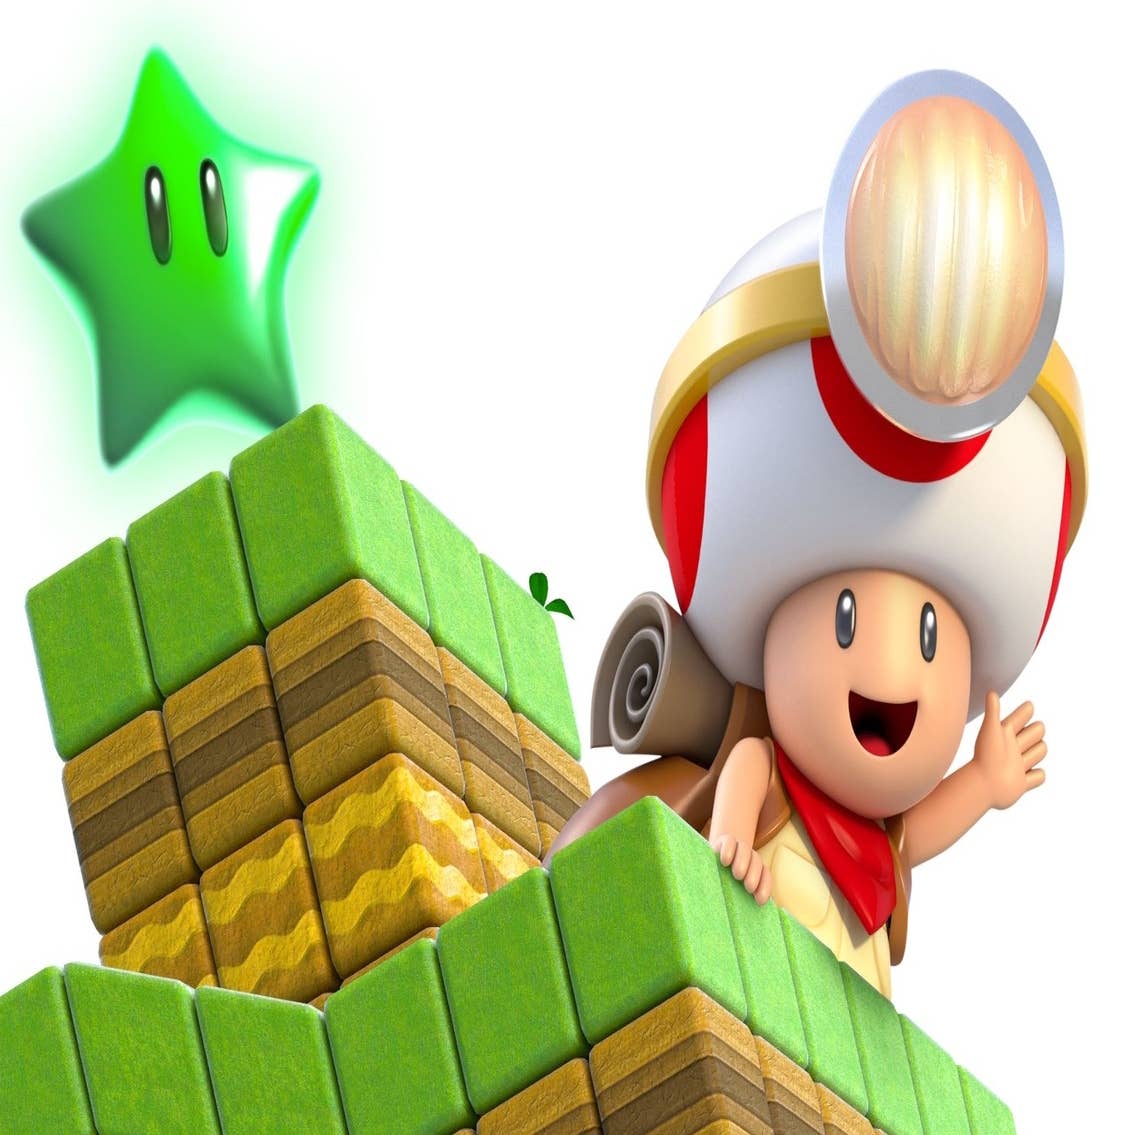 Video: Super Mario 3D World's Captain Toad levels shown off